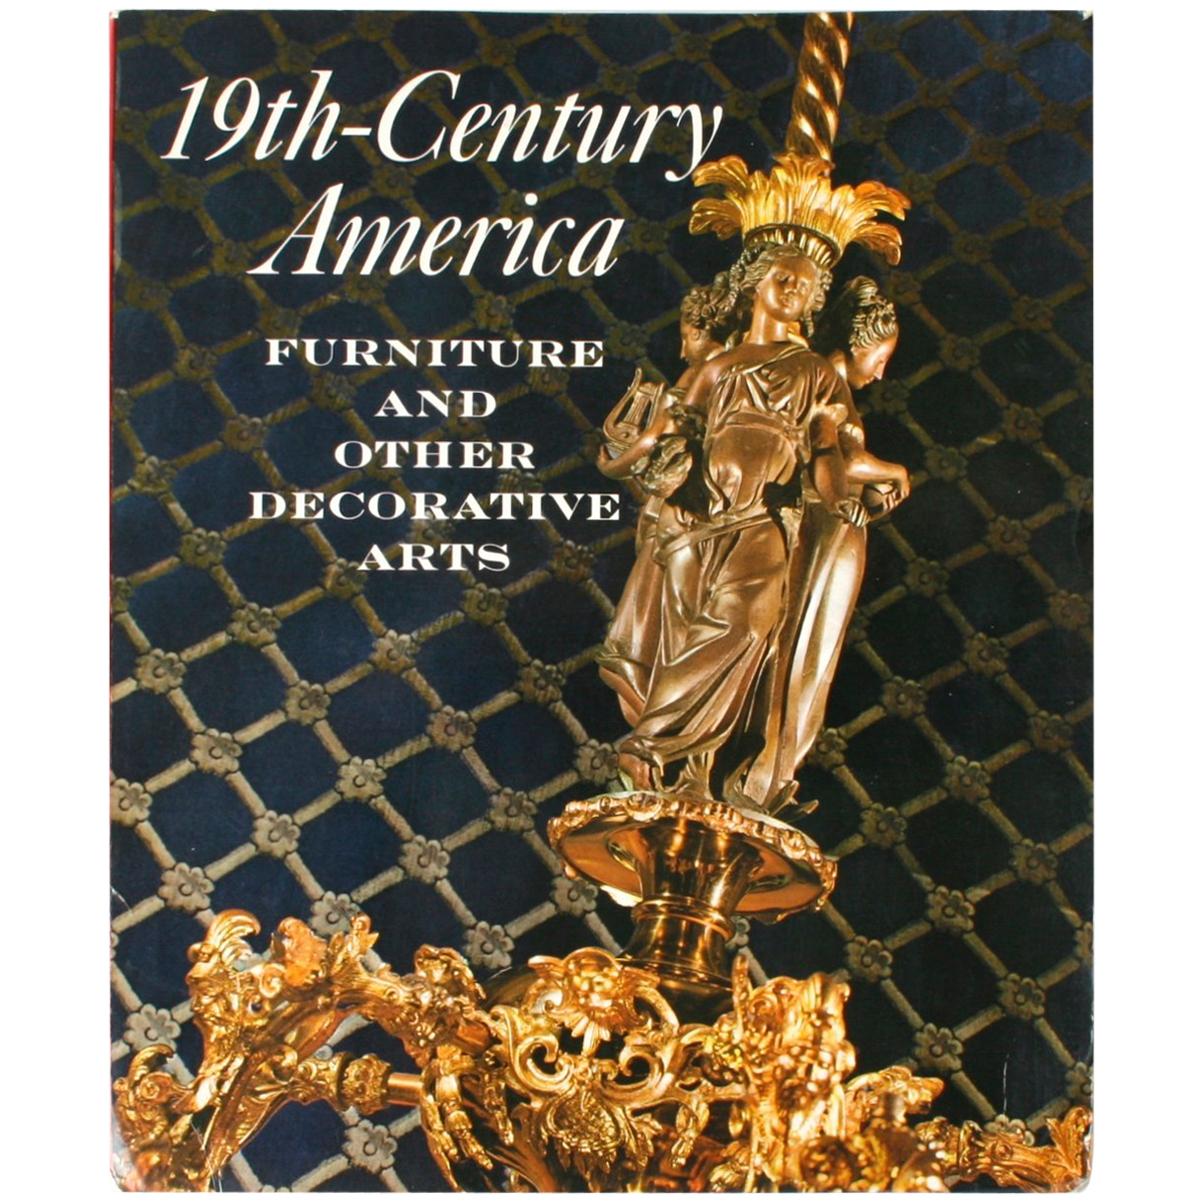 19th Century America Furniture and Other Decorative Arts by Marvin D. Schwartz